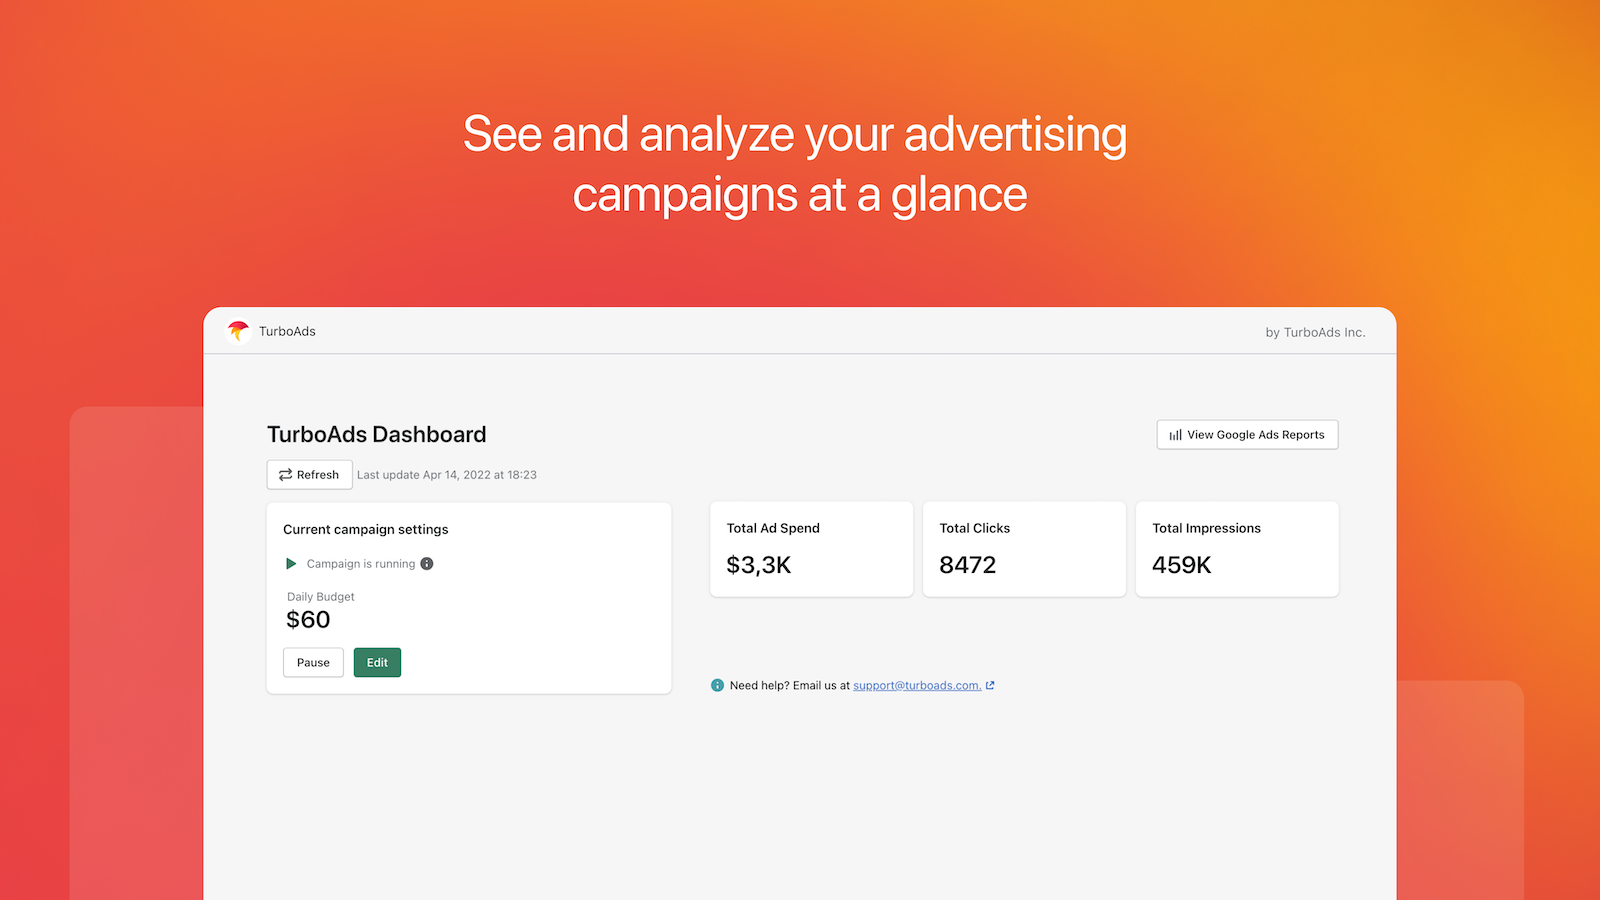 See and analyze your advertising campaigns at a glance